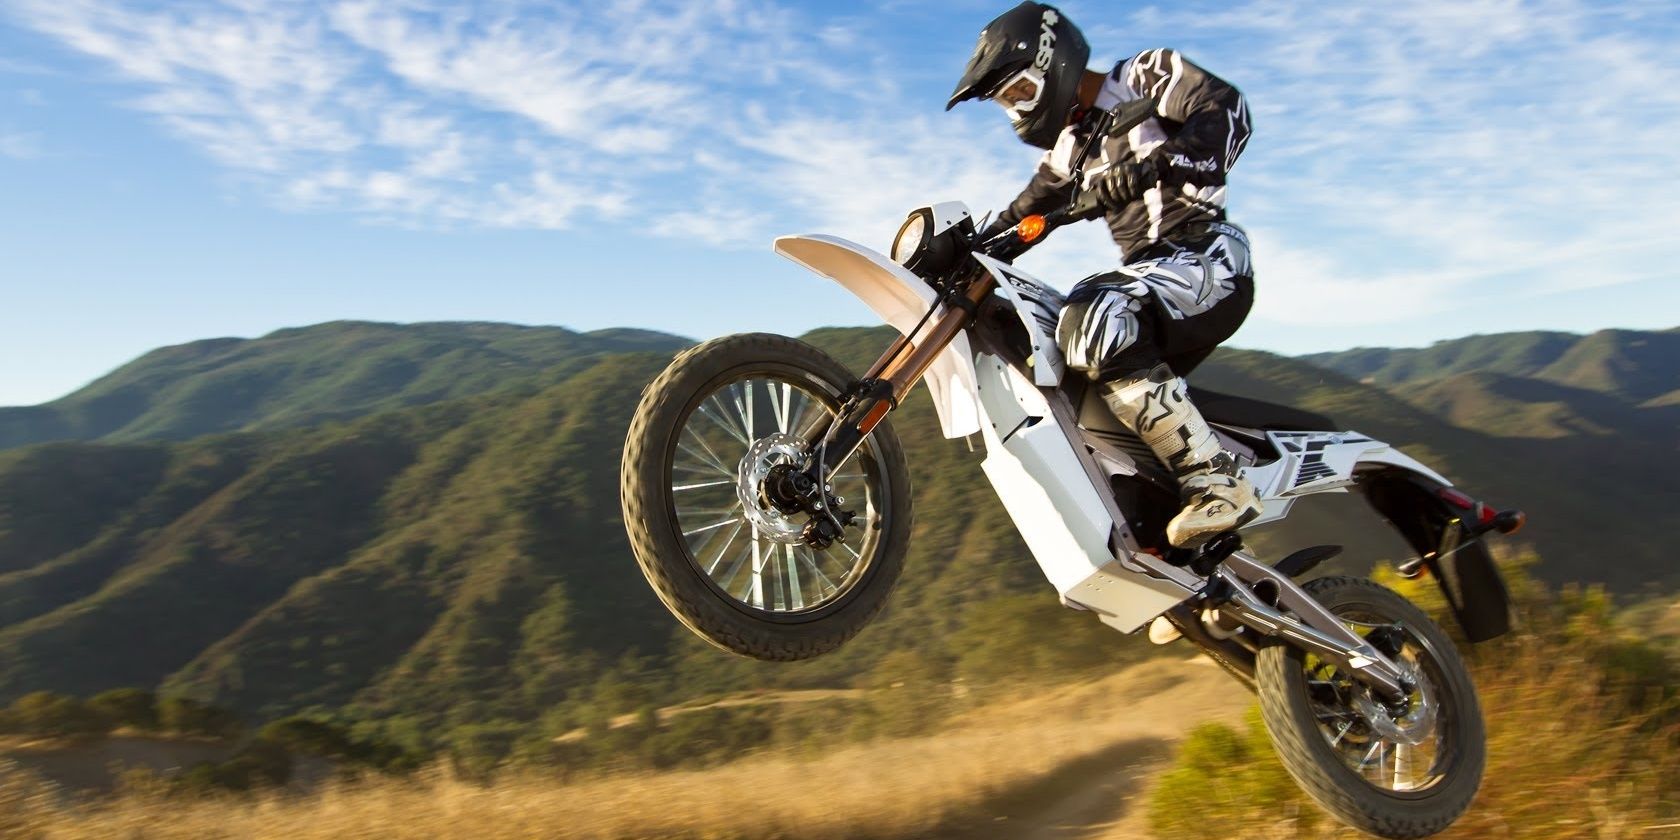 A Rider On A Zero Motorcycle Performing A Jump